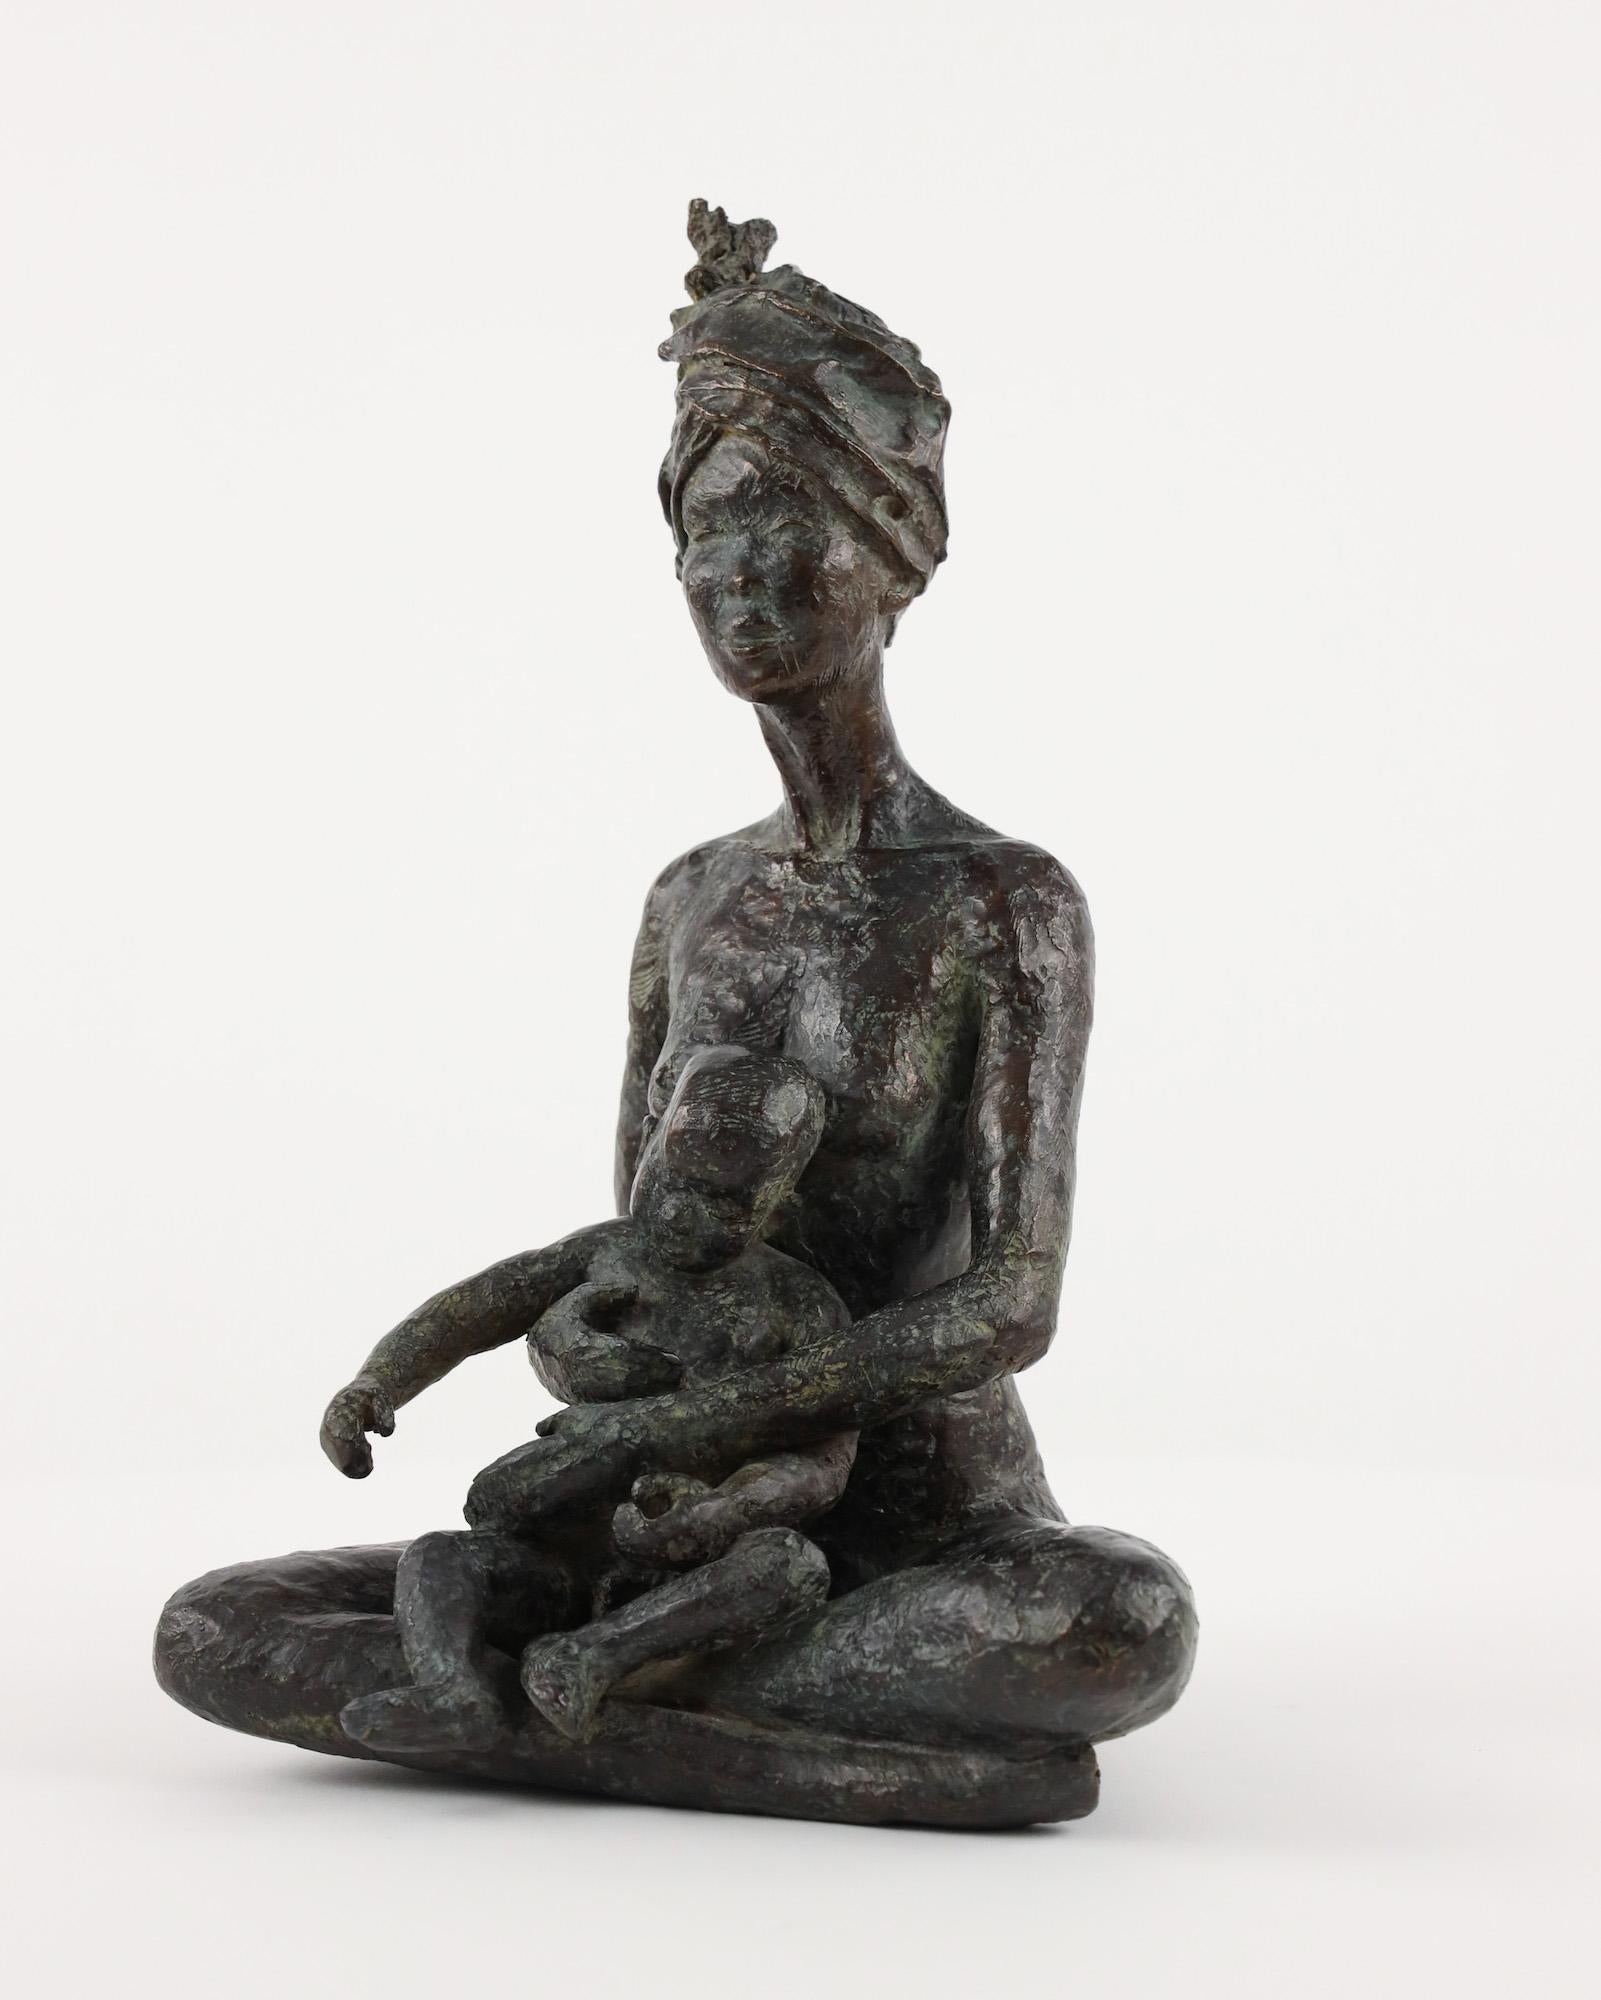 You too my son is a bronze sculpture by French contemporary artist Marine de Soos, dimensions are 32 × 21 × 19 cm (12.6 × 8.3 × 7.5 in). 
The sculpture is signed and numbered, it is part of a limited edition of 8 editions + 4 artist’s proofs, and